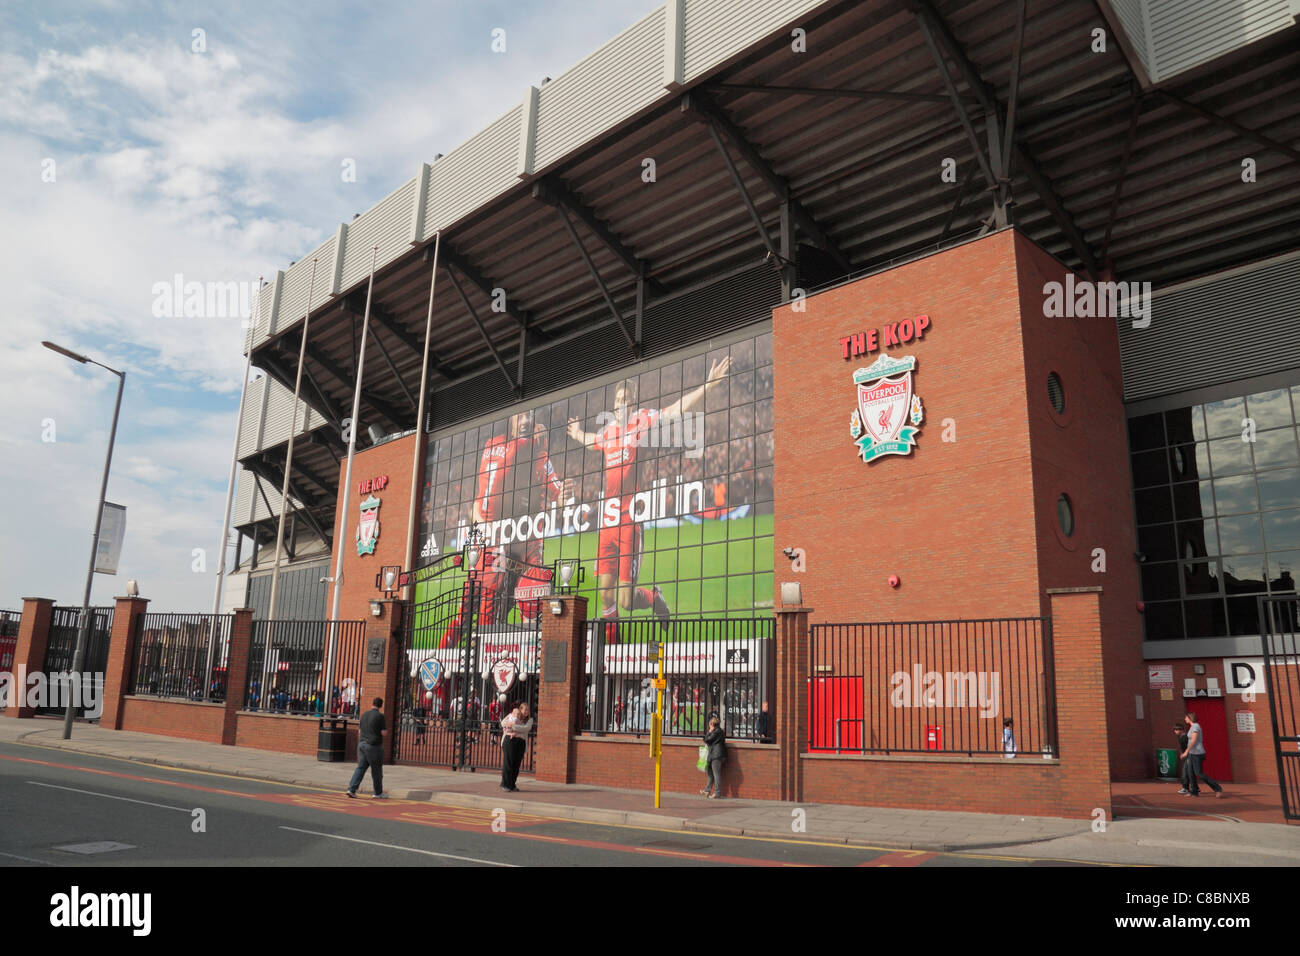 External view of the Kop end of Anfield, with the Paisley Gate at the home ground of Liverpool Football club. Aug 2011 Stock Photo